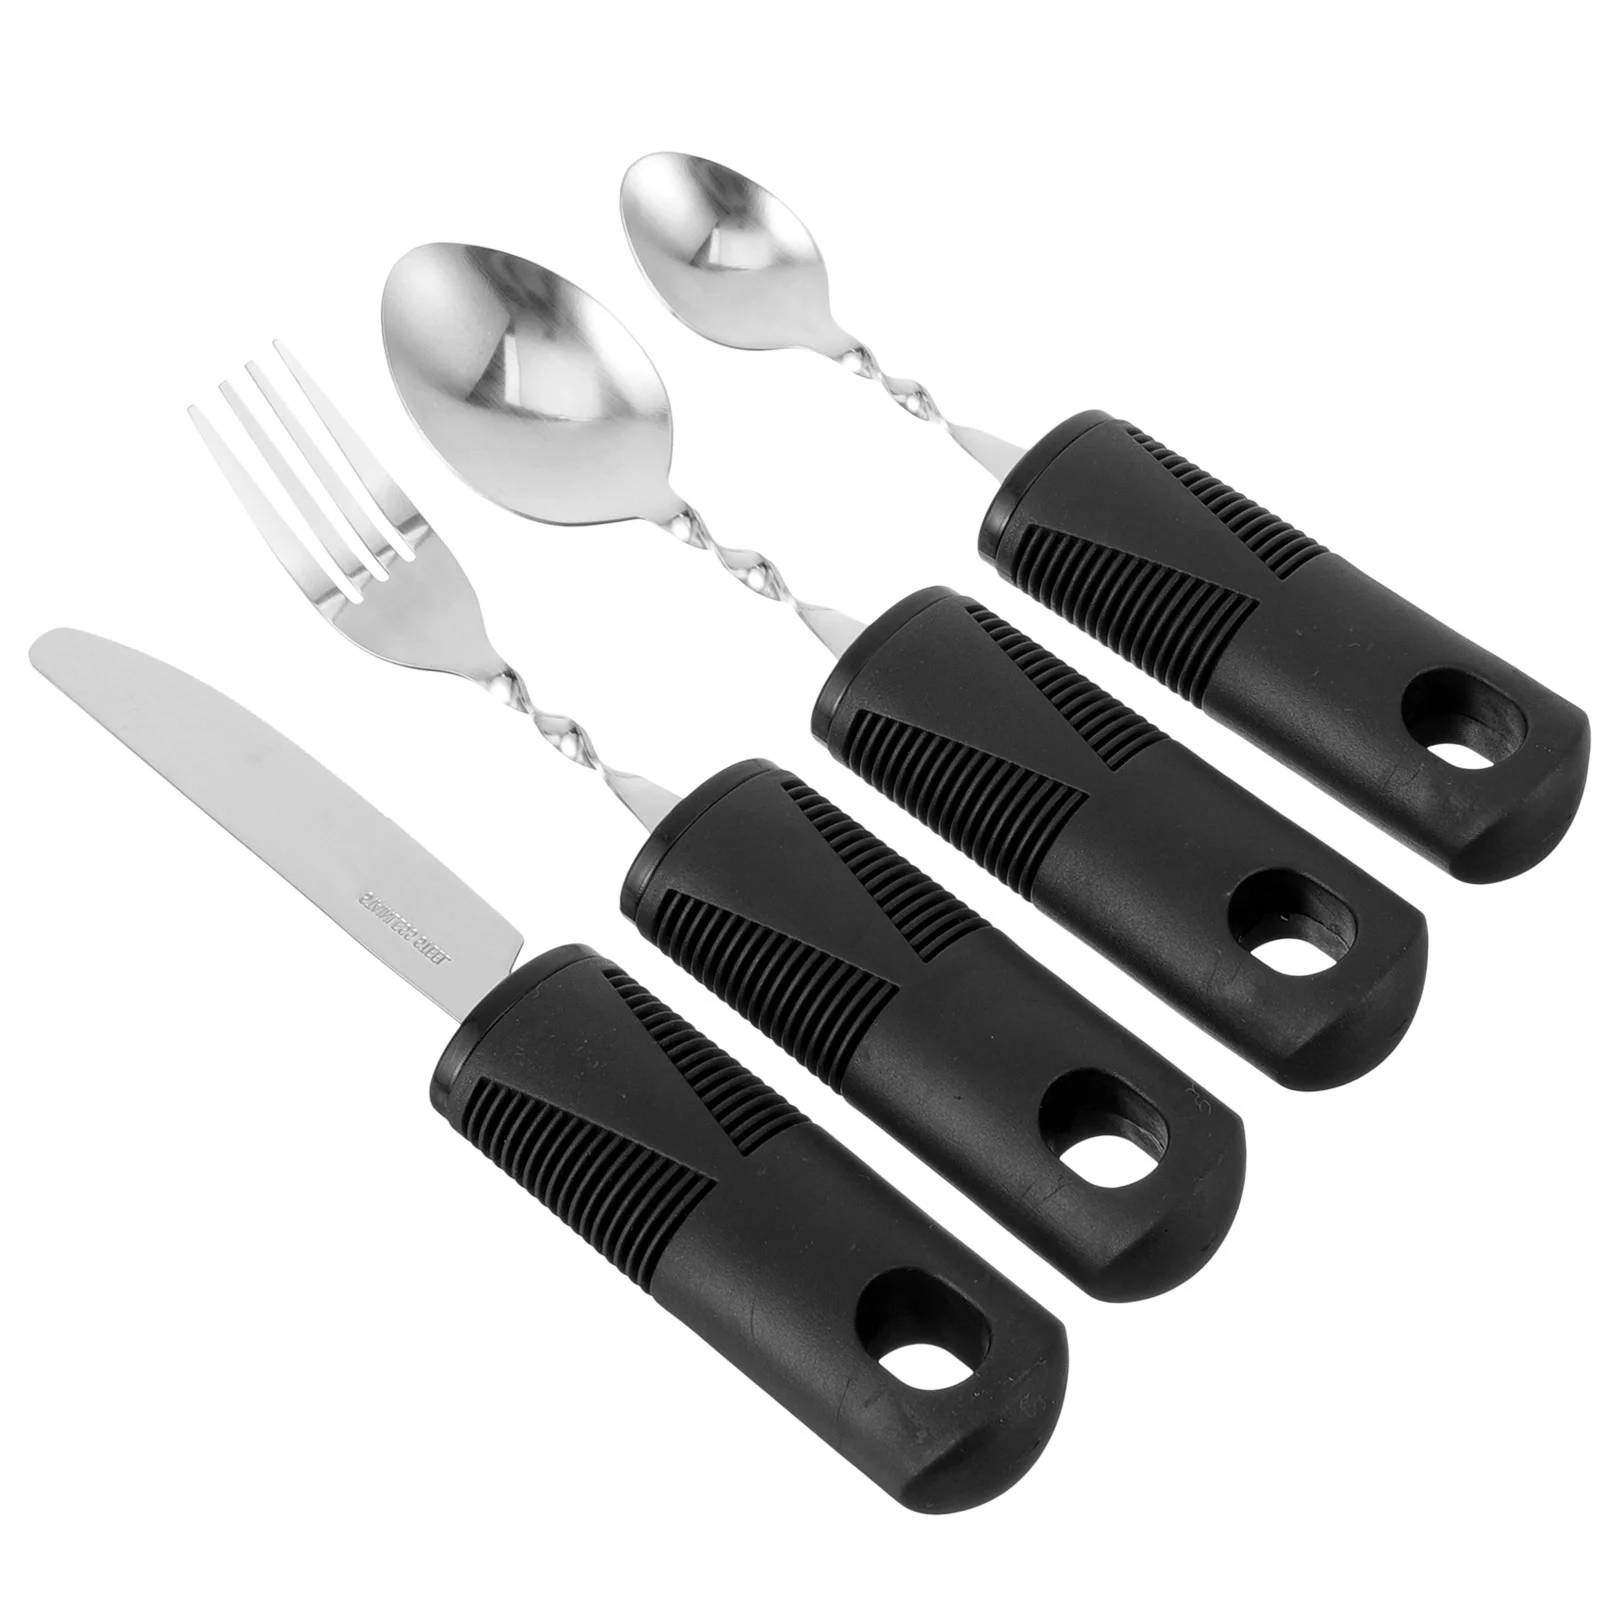 

Bendable Cutlery Disabled People Utensil The Elderly Tableware Portable Adaptive Weighted Utensils Built Adults Parkinson